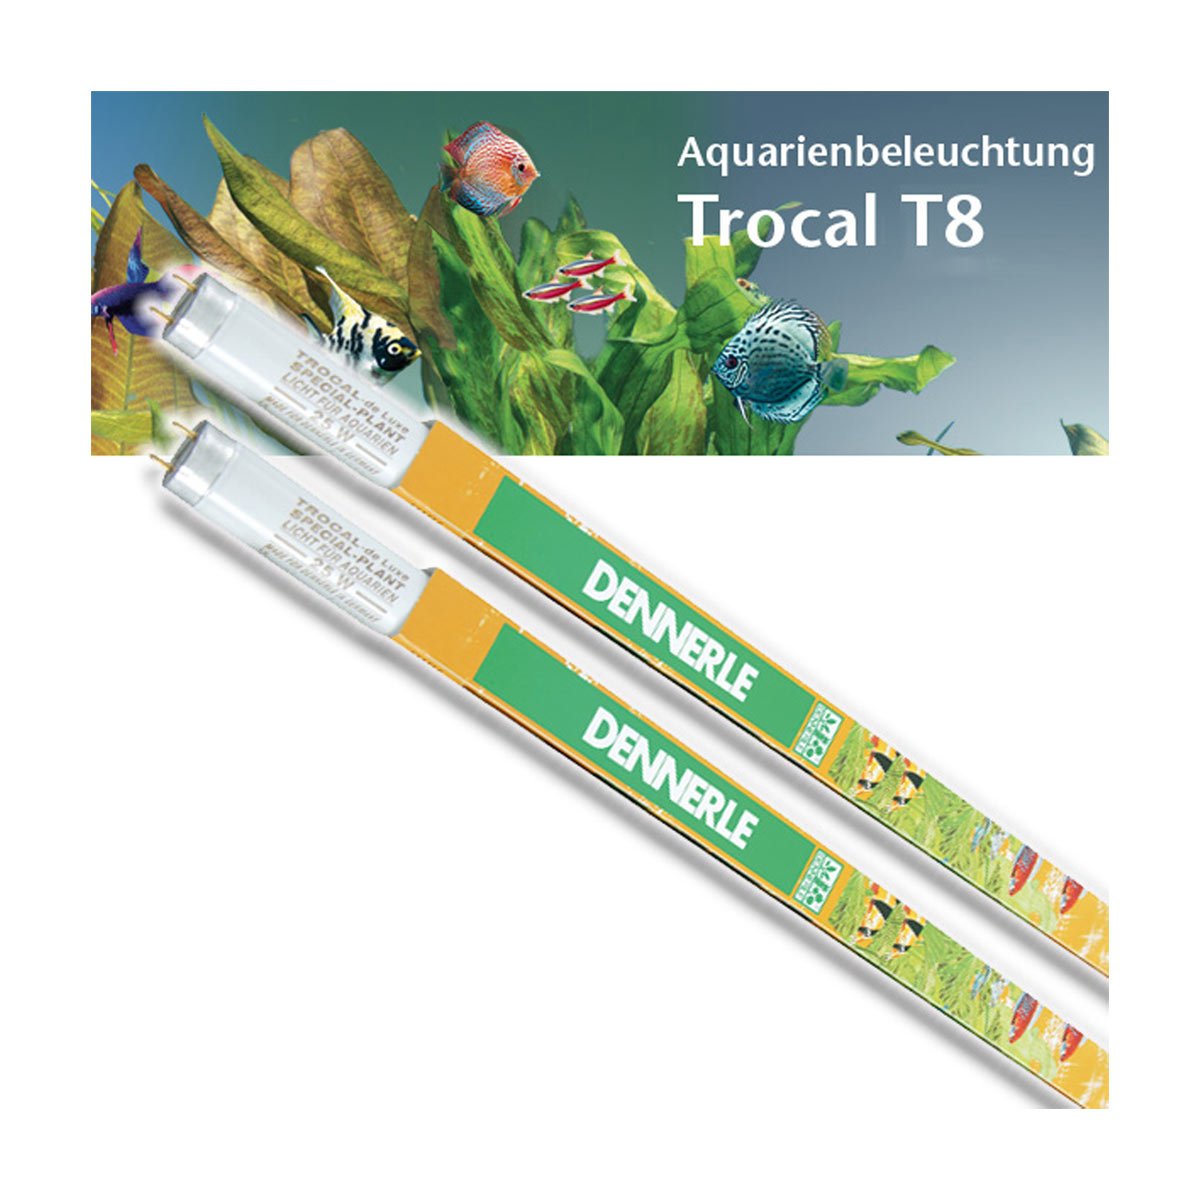 Dennerle Trocal de Luxe T8 Special Plant DUO 2x15W/438mm von Dennerle